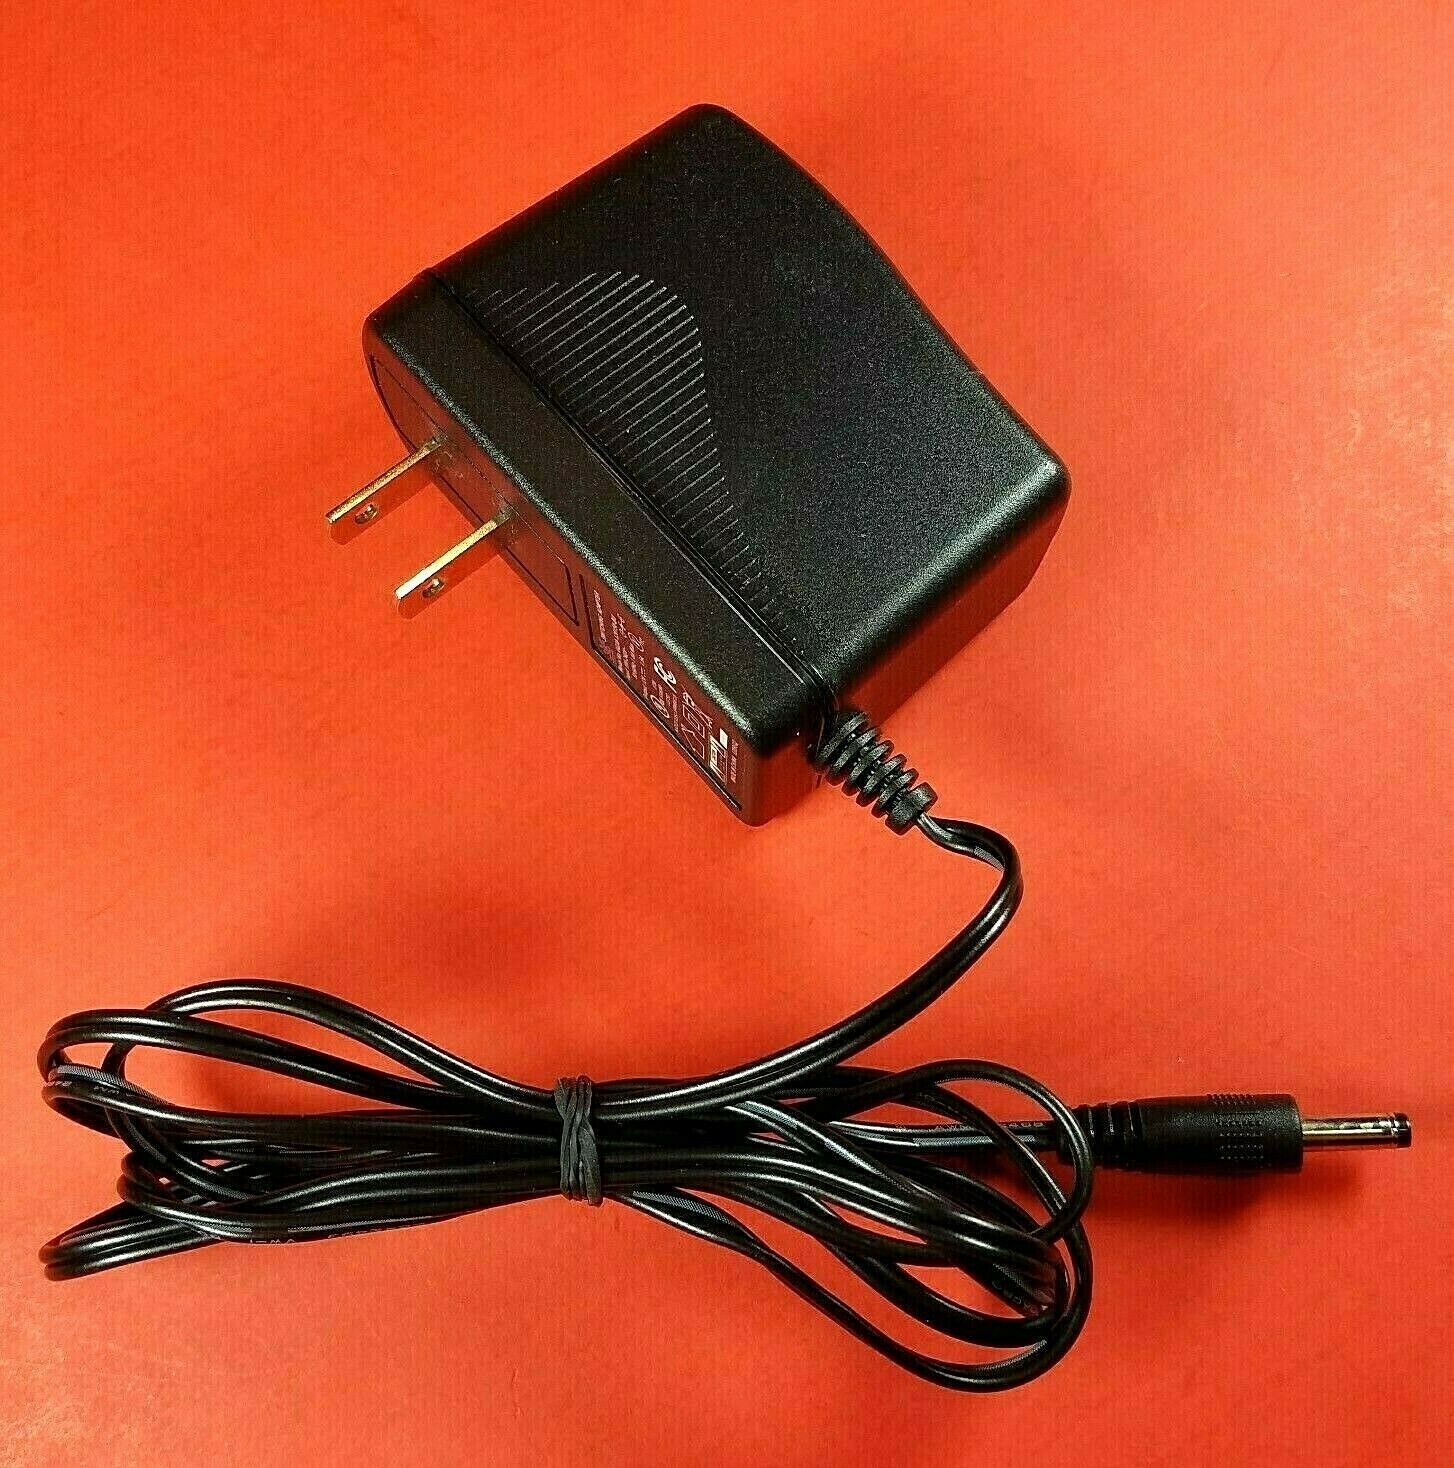 5V 3A Power Supply USB Type-C Adapter Charger for Raspberry Pi 4 Model US EU Specification Input: AC 110-240V, 50-60H